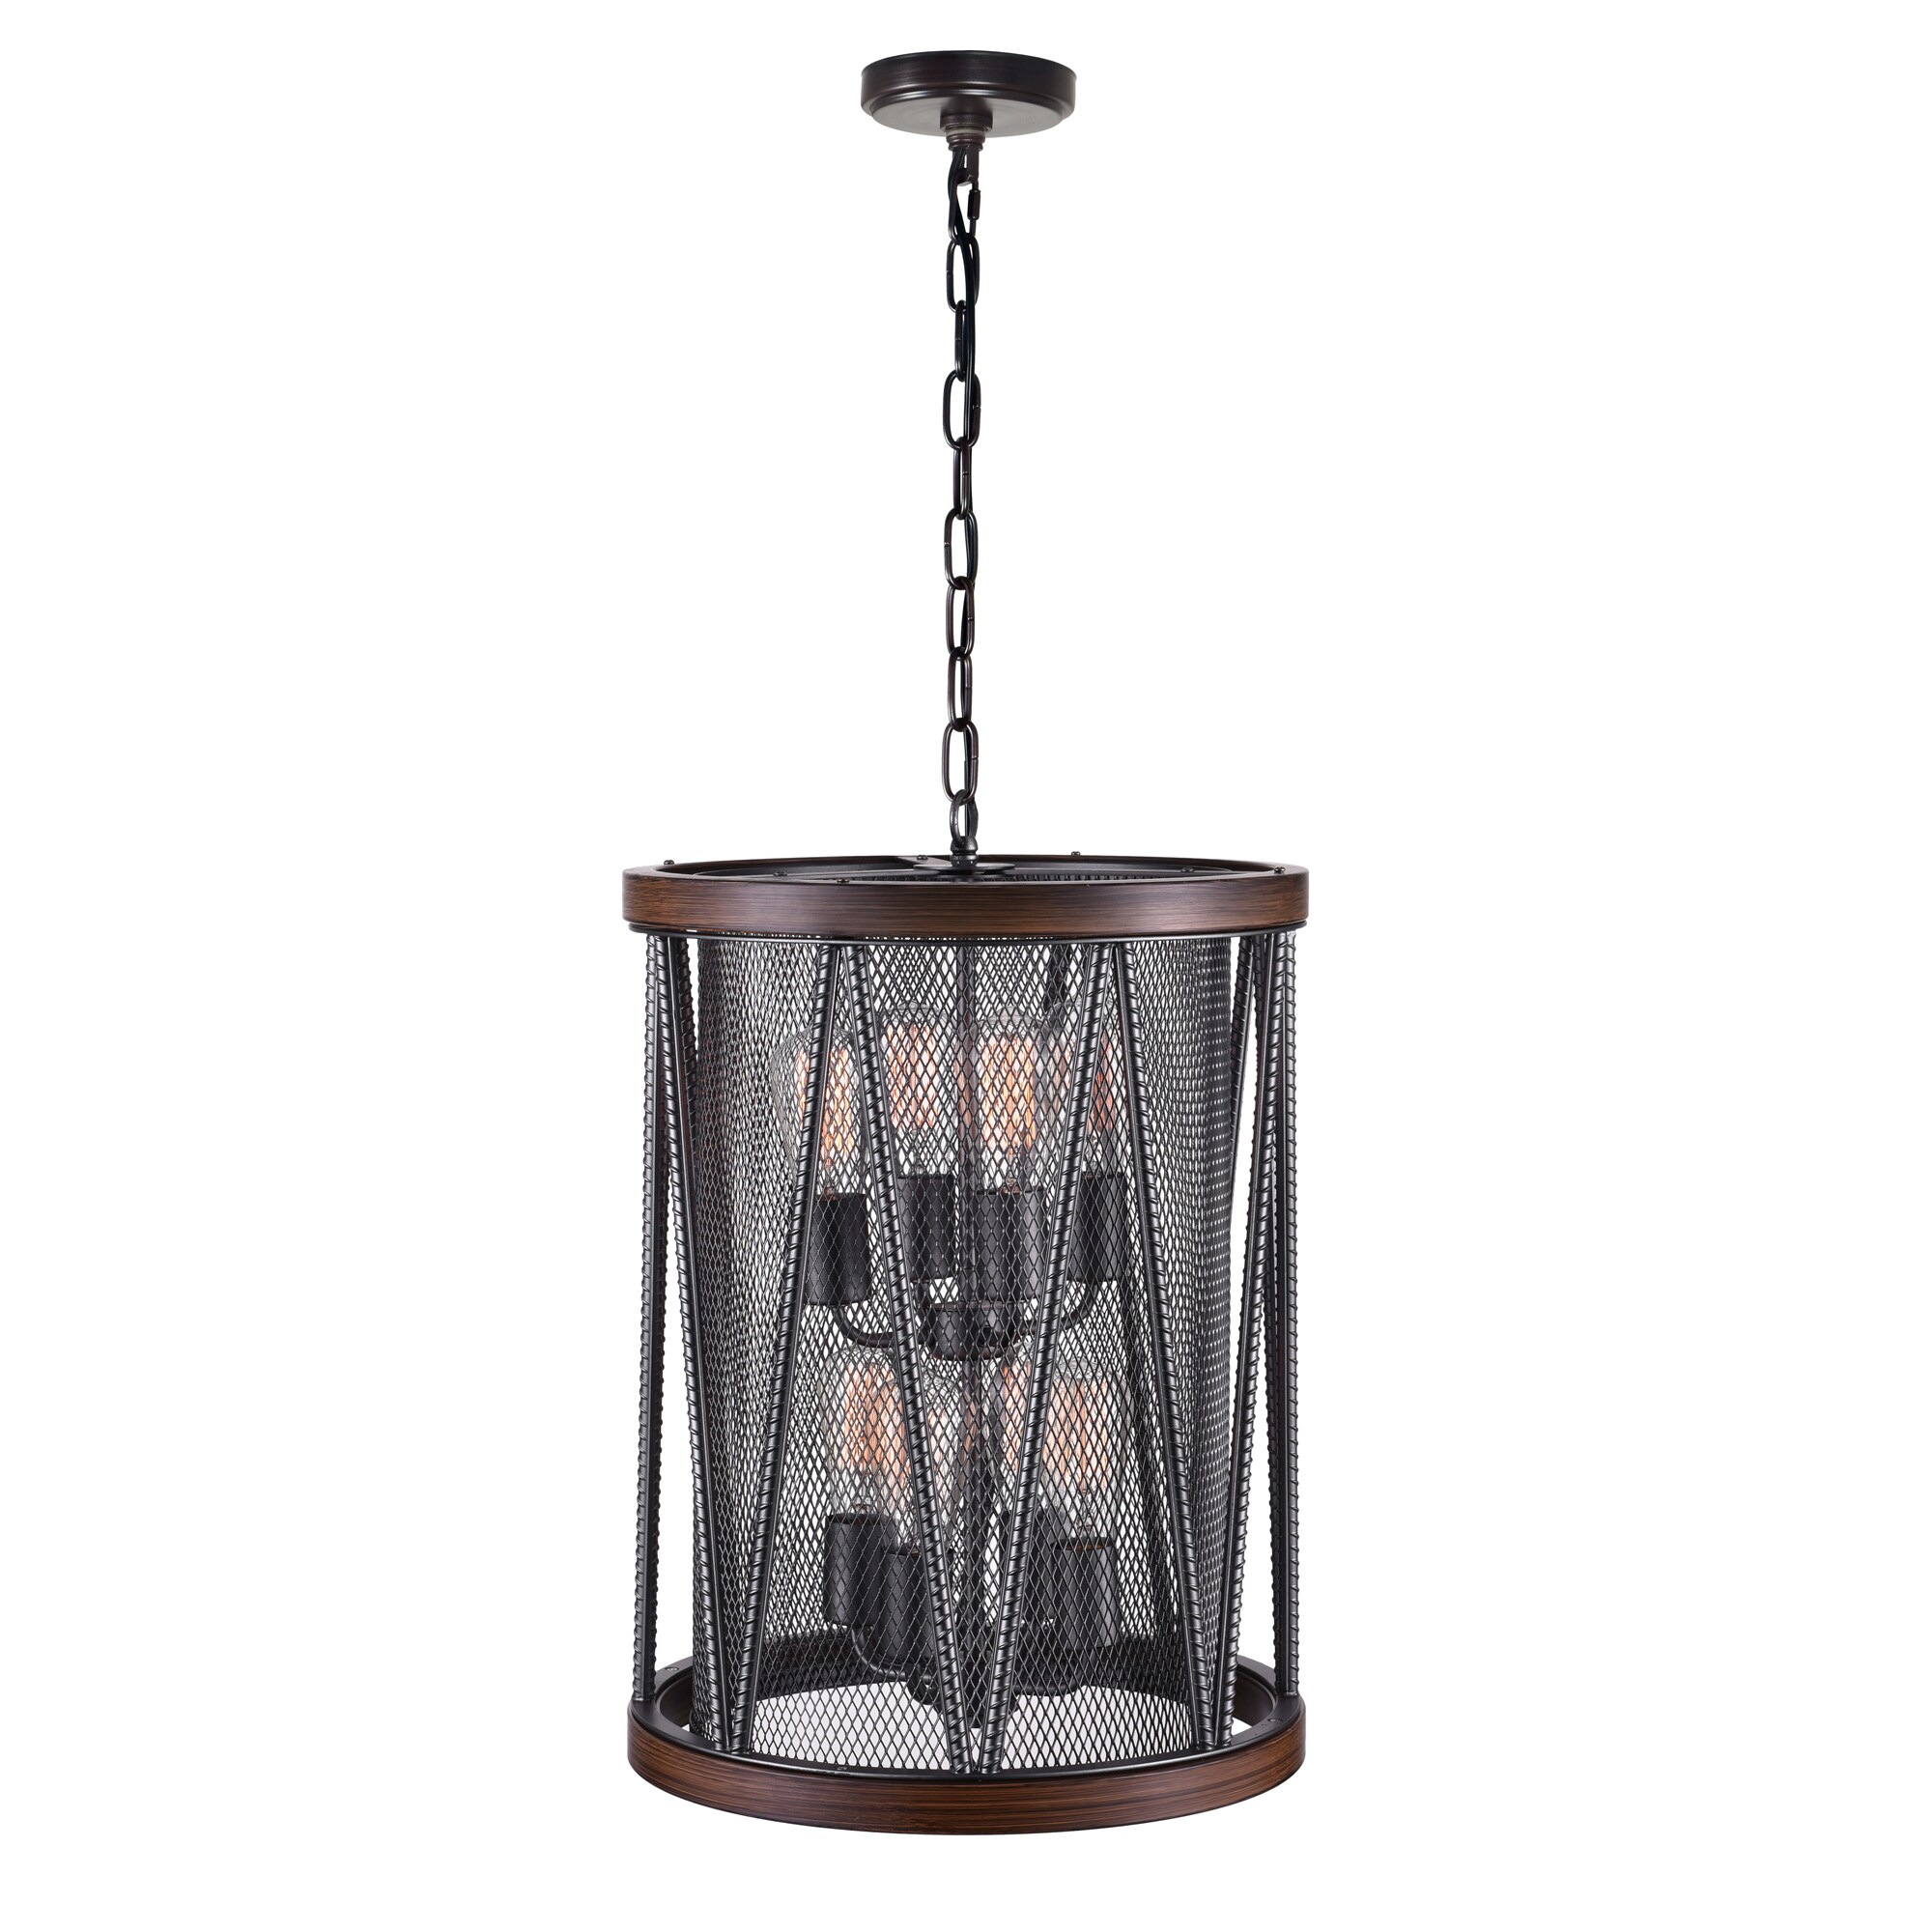 CWI Lighting Parsh 8-Light Pewter Rustic Damp Rated Chandelier in the ...